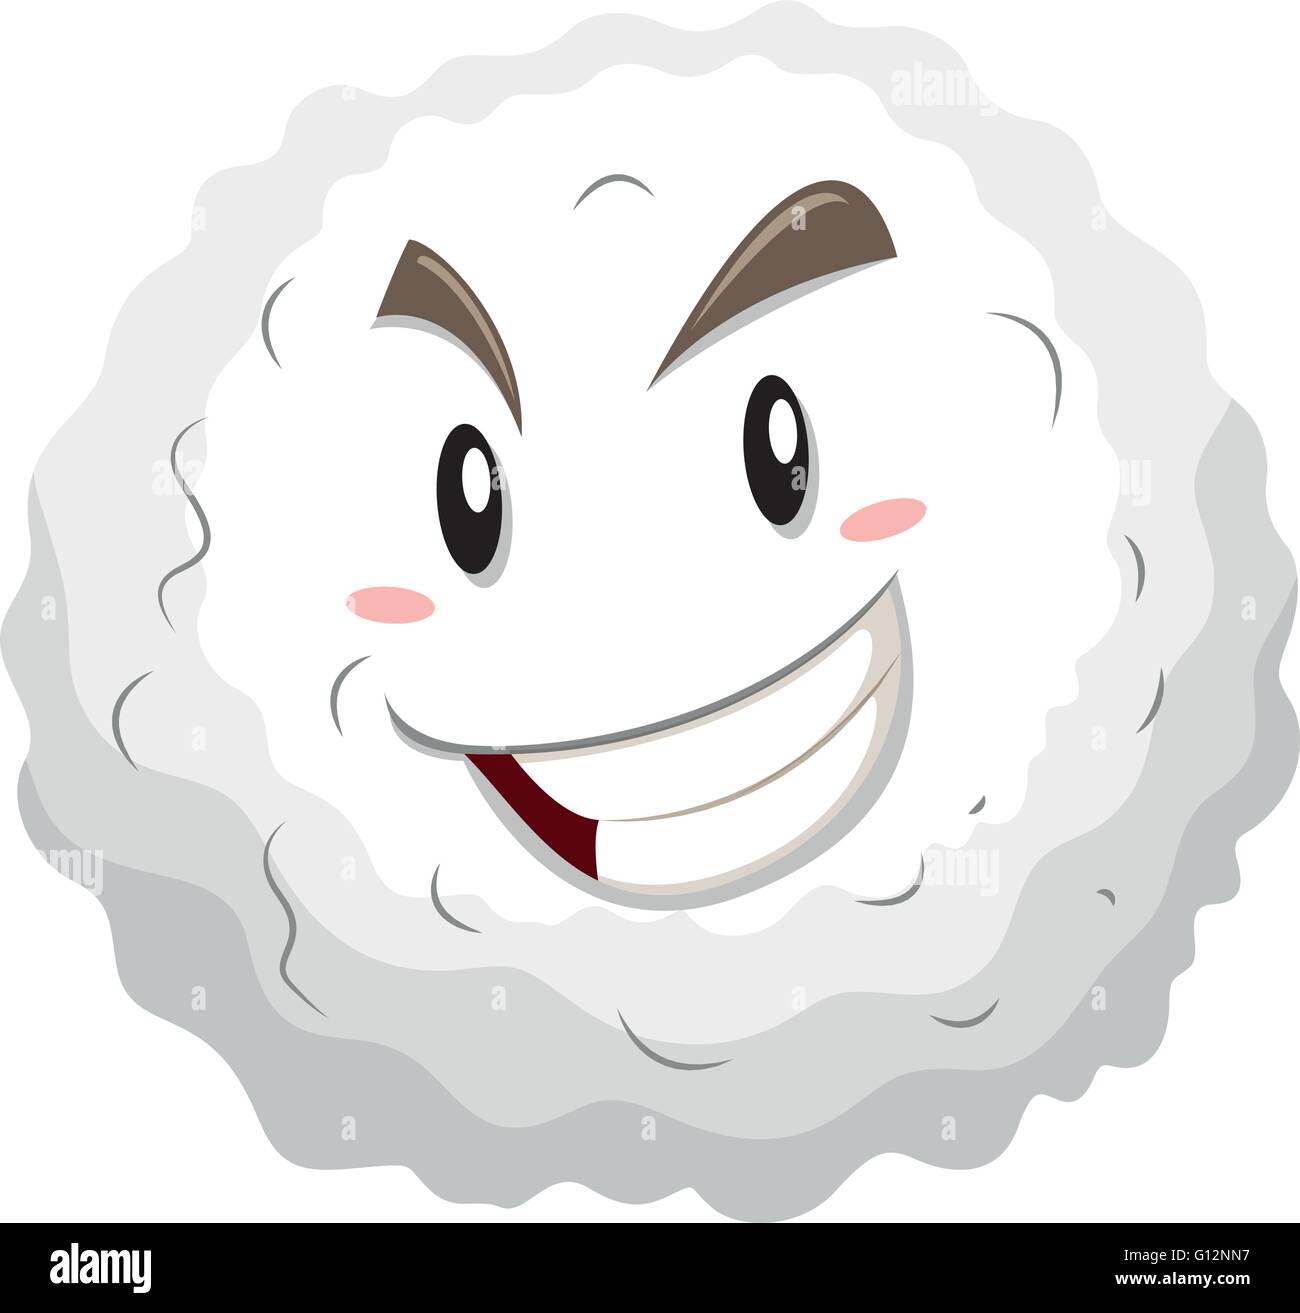 White blood cell with happy face illustration Stock Vector